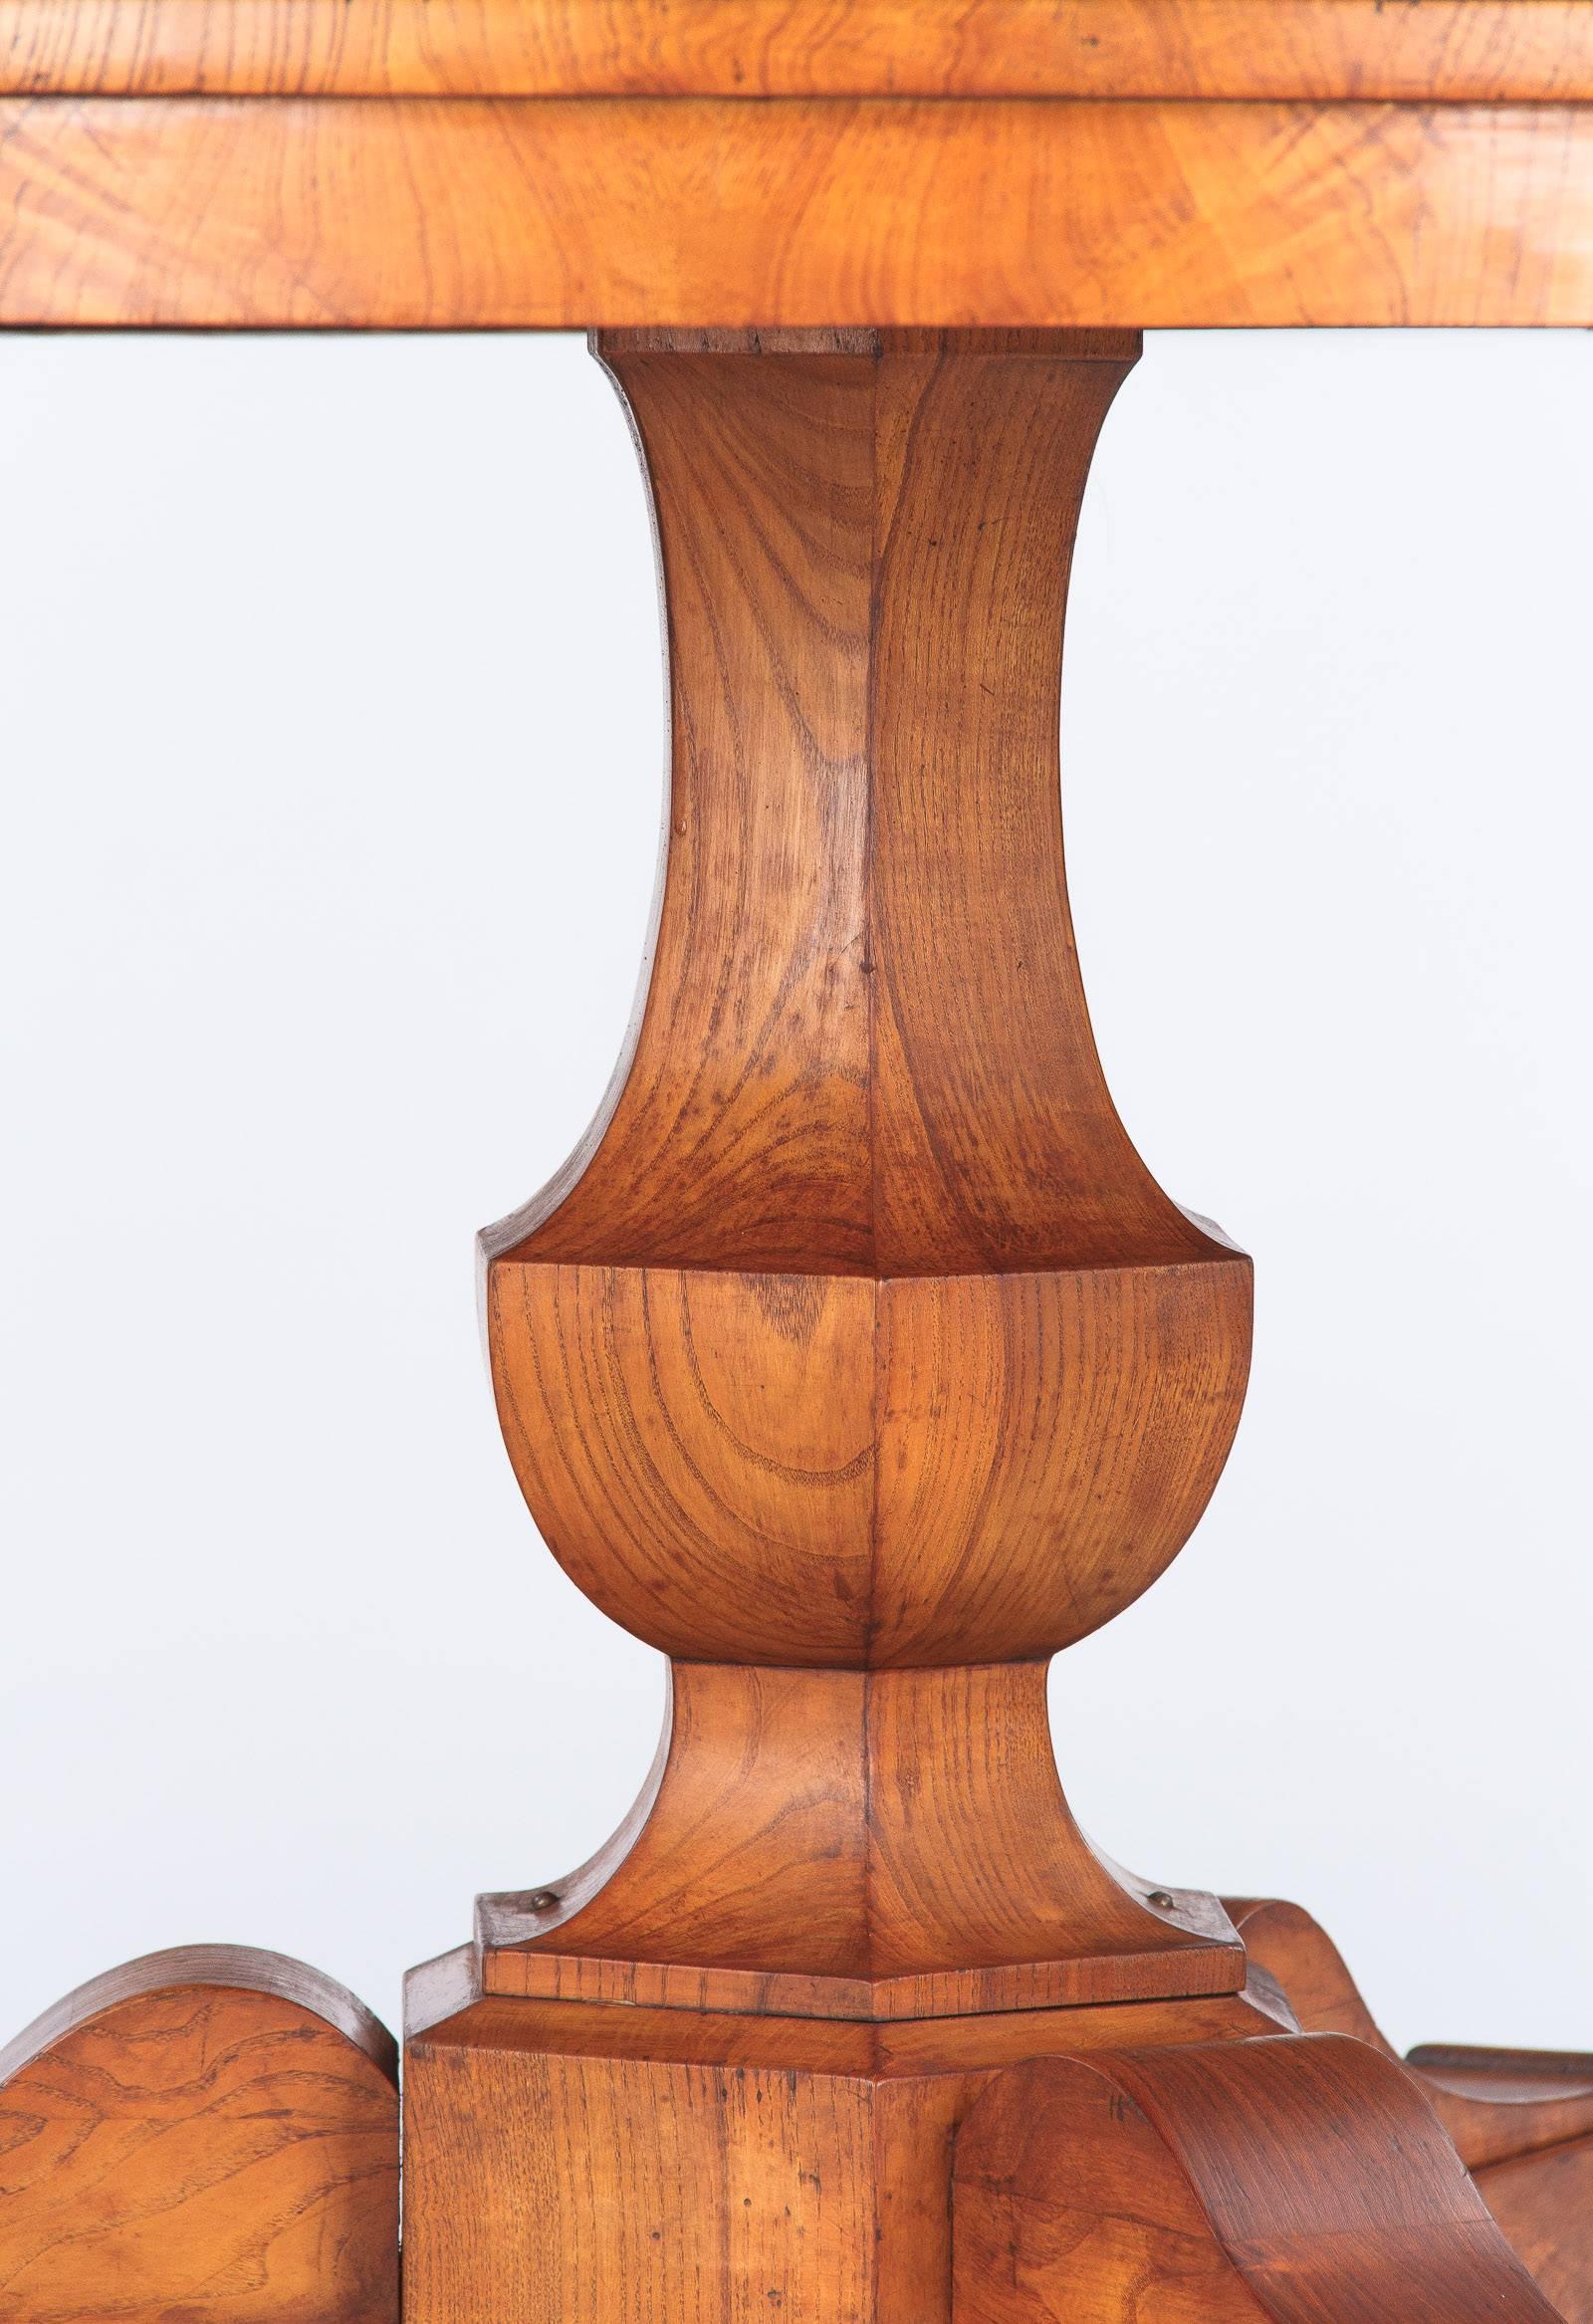 19th Century French Charles X Period Ashwood Pedestal Table, Early 1800s